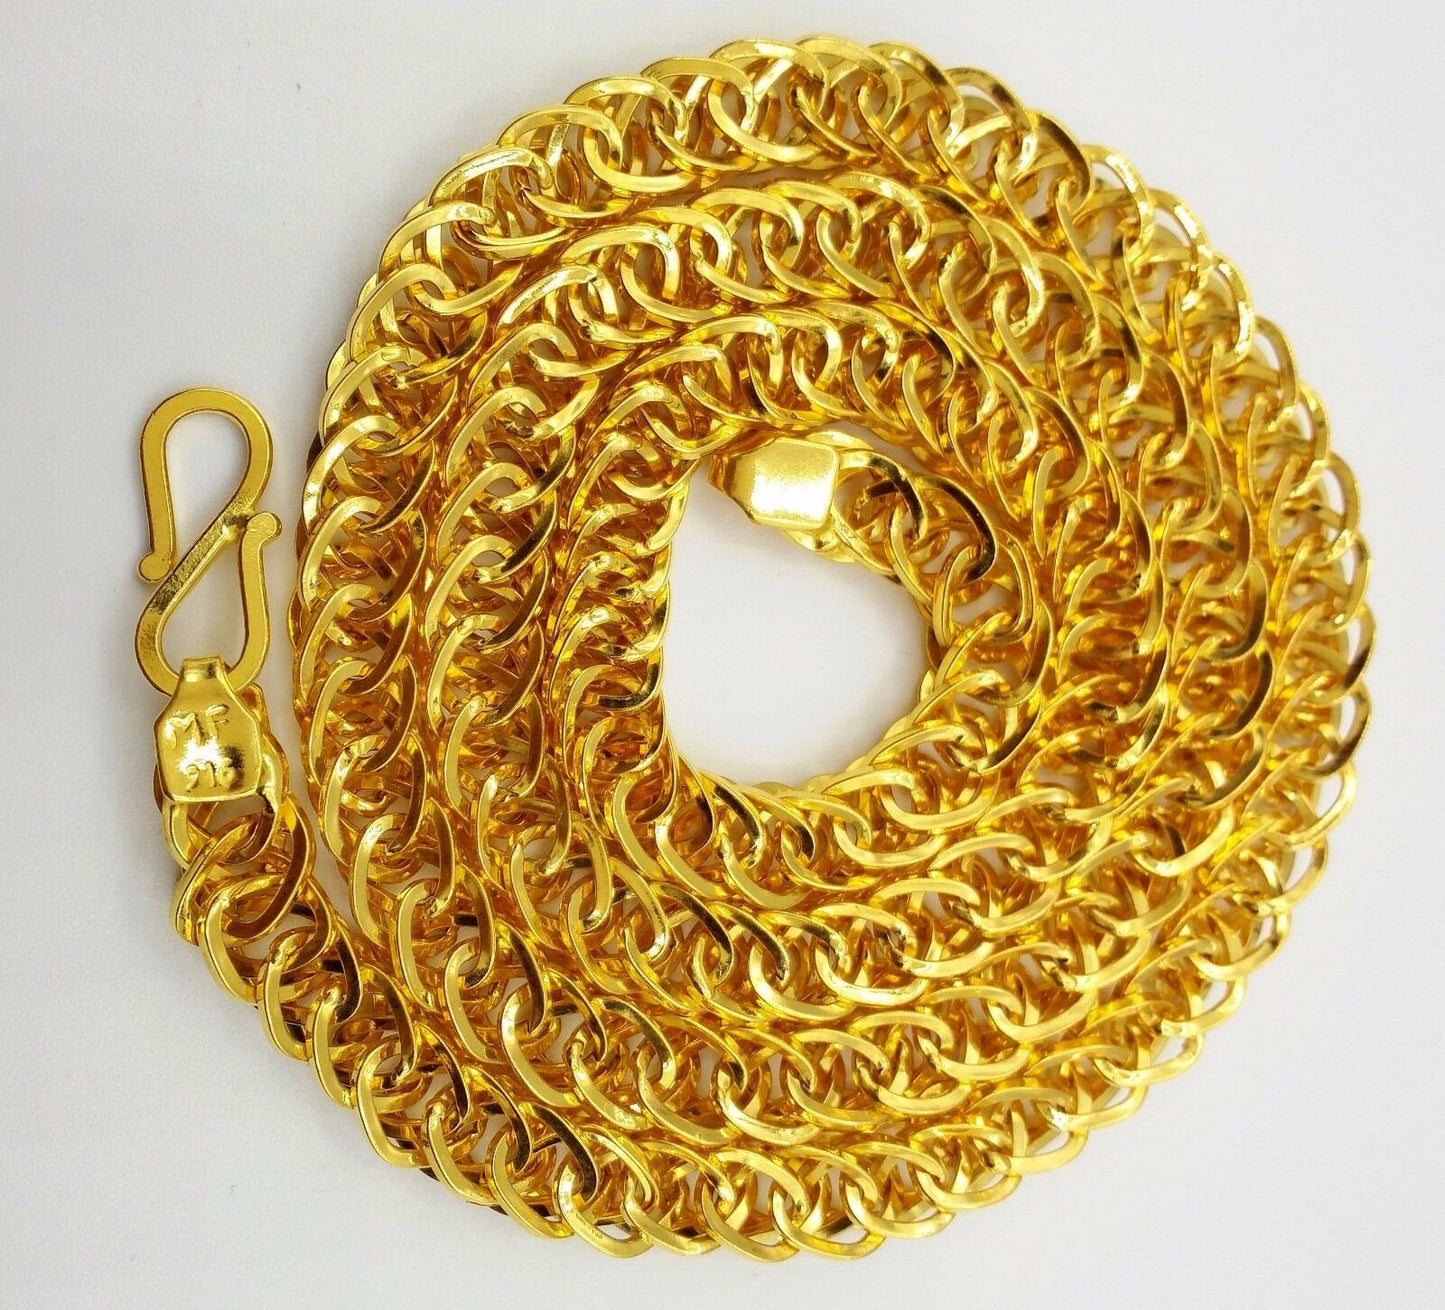 Handmade 22 karat Vintage style 20 inches long fabulous foxtail link chain necklace for unisex jewelry from rajastjan - TRIBAL ORNAMENTS